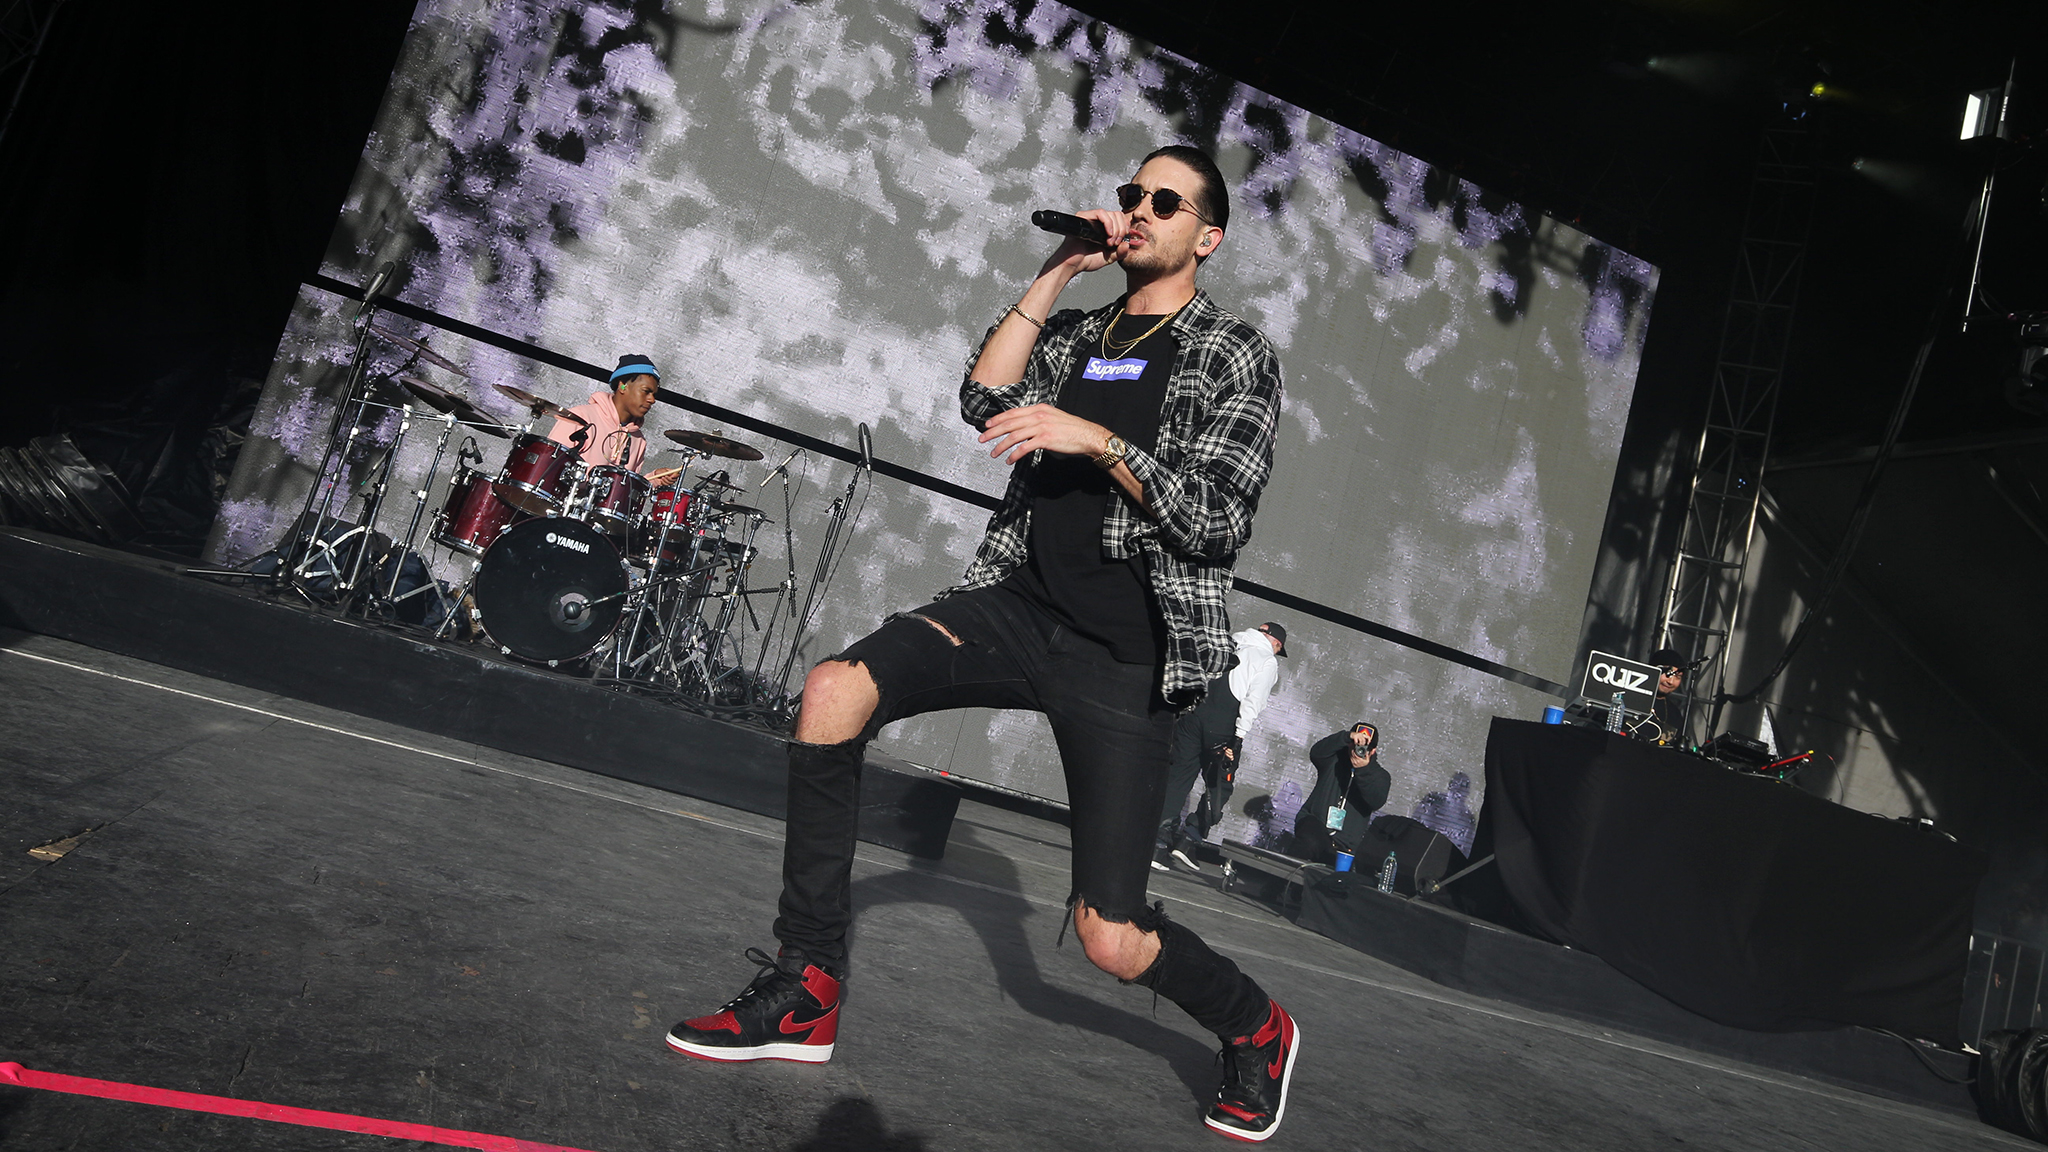 G-Eazy rips it up